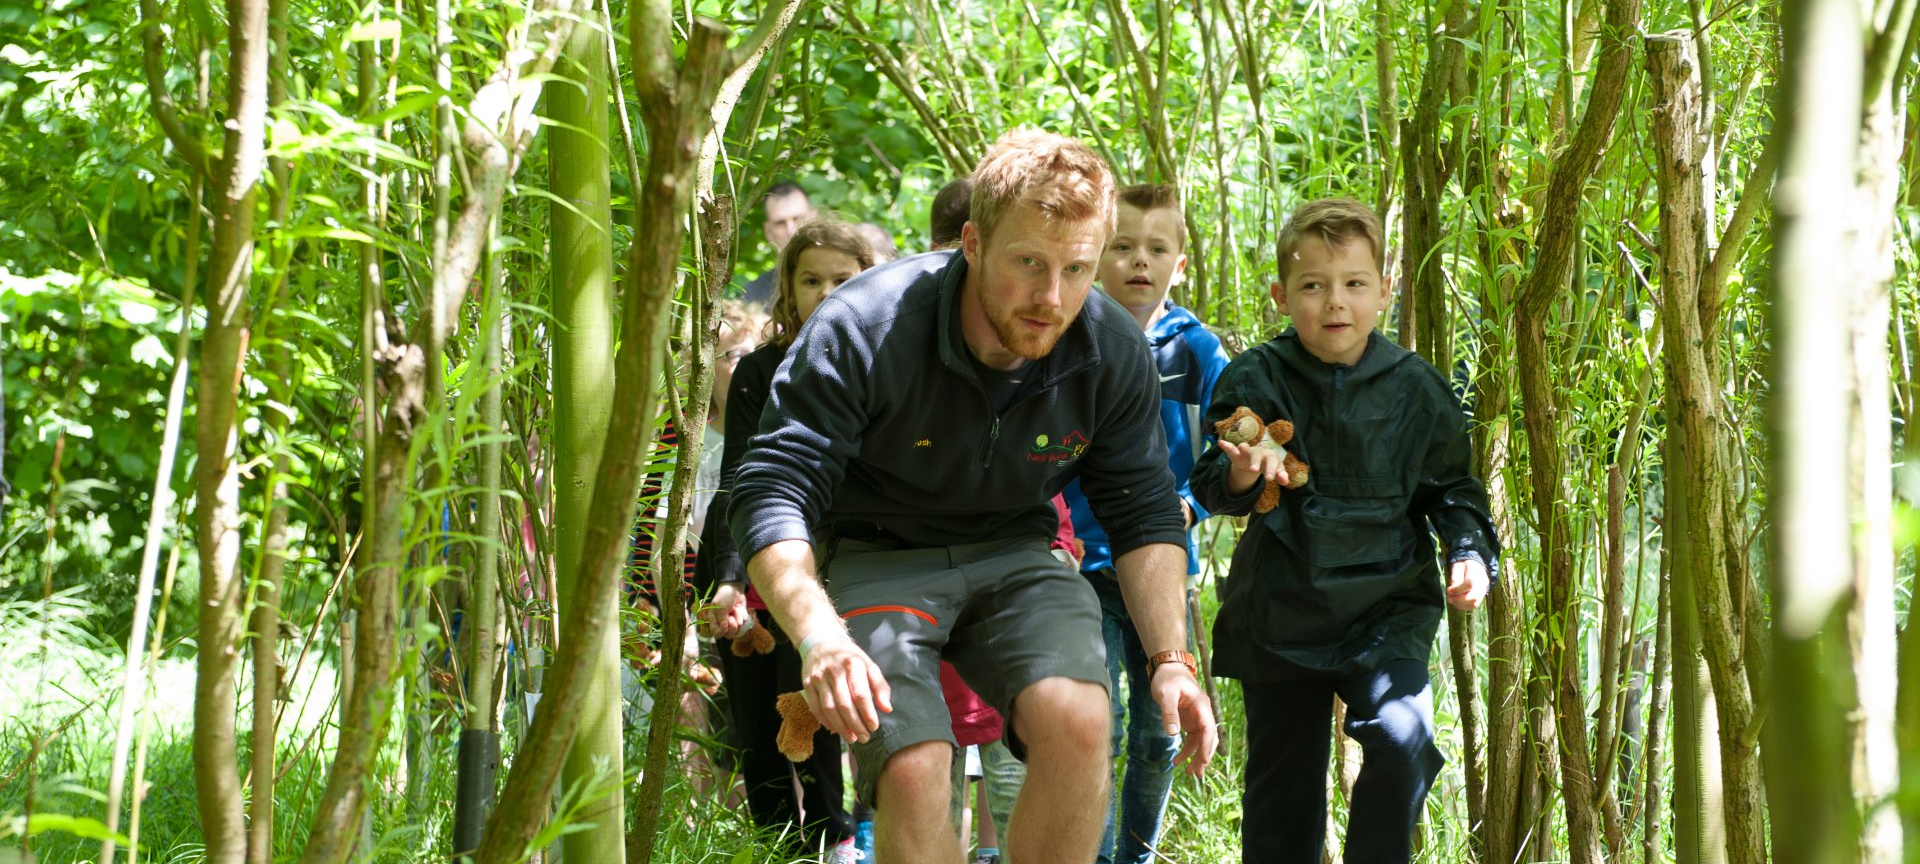 Children on a bear hunt at Nell Bank Outdoor Education Centre near Bradford